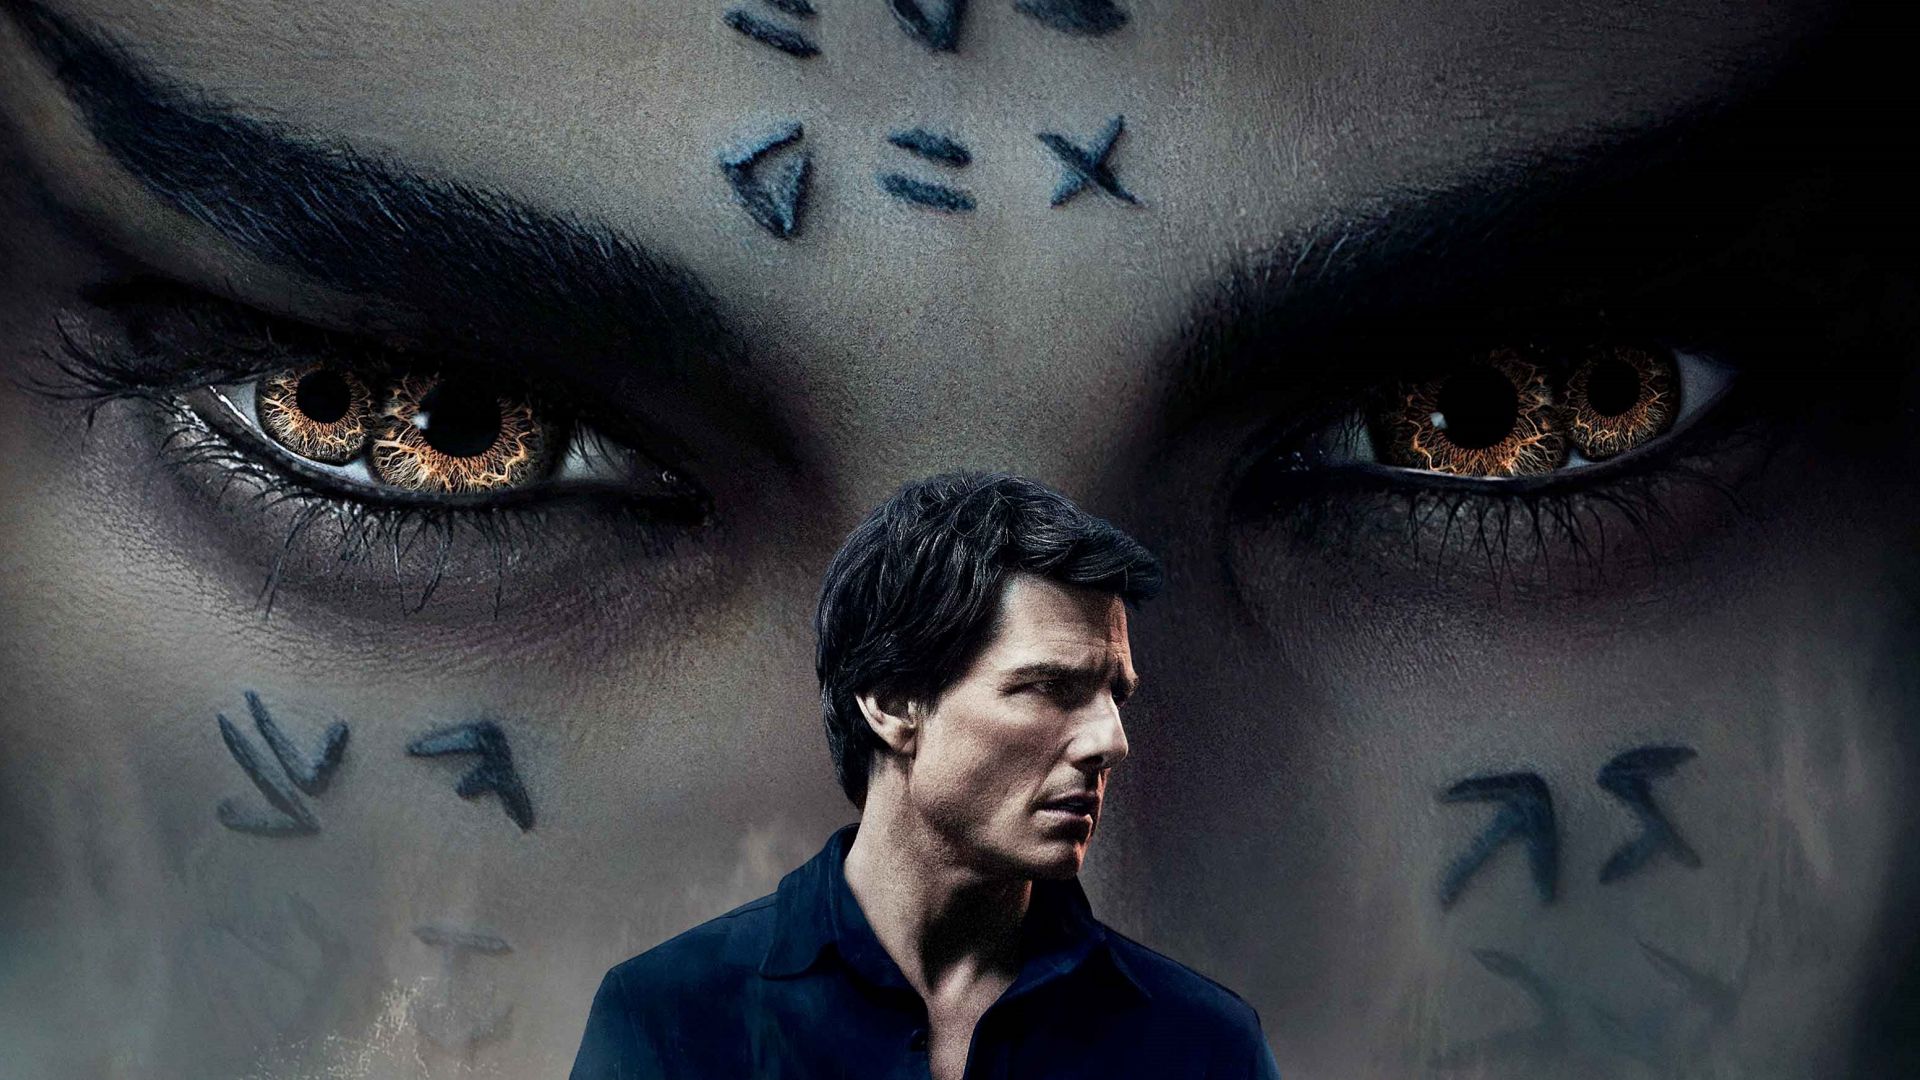 Wallpaper The Mummy, 2017 movie, Tom Cruise, face, eyes